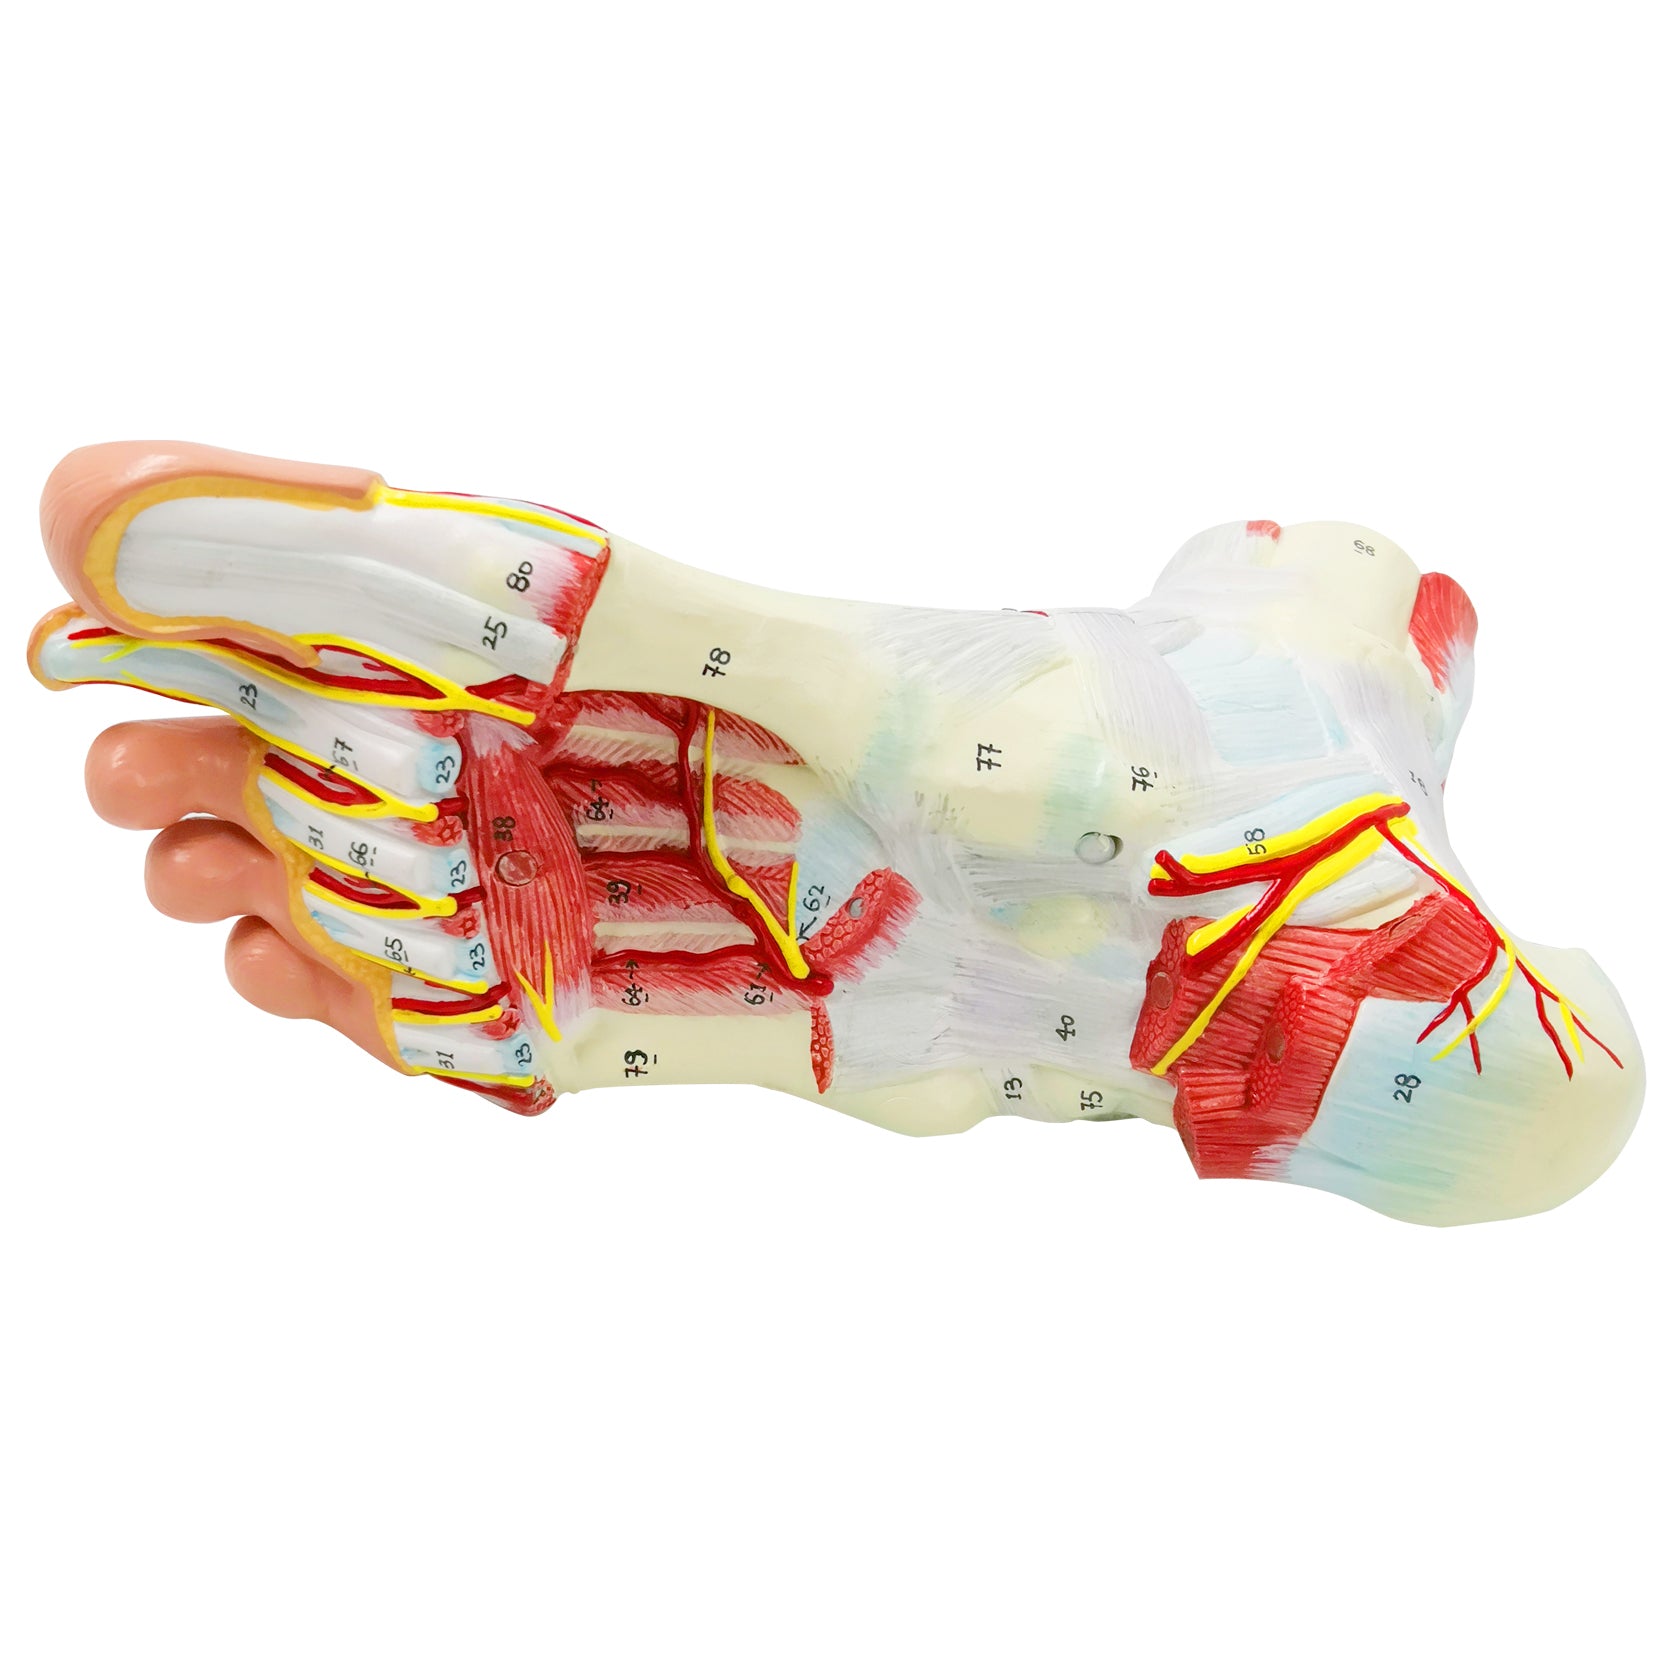 Evotech Scientific Life Size Numbered Foot Anatomical Skeleton Model with Bones Muscles Ligaments Nerves and Blood Vessels